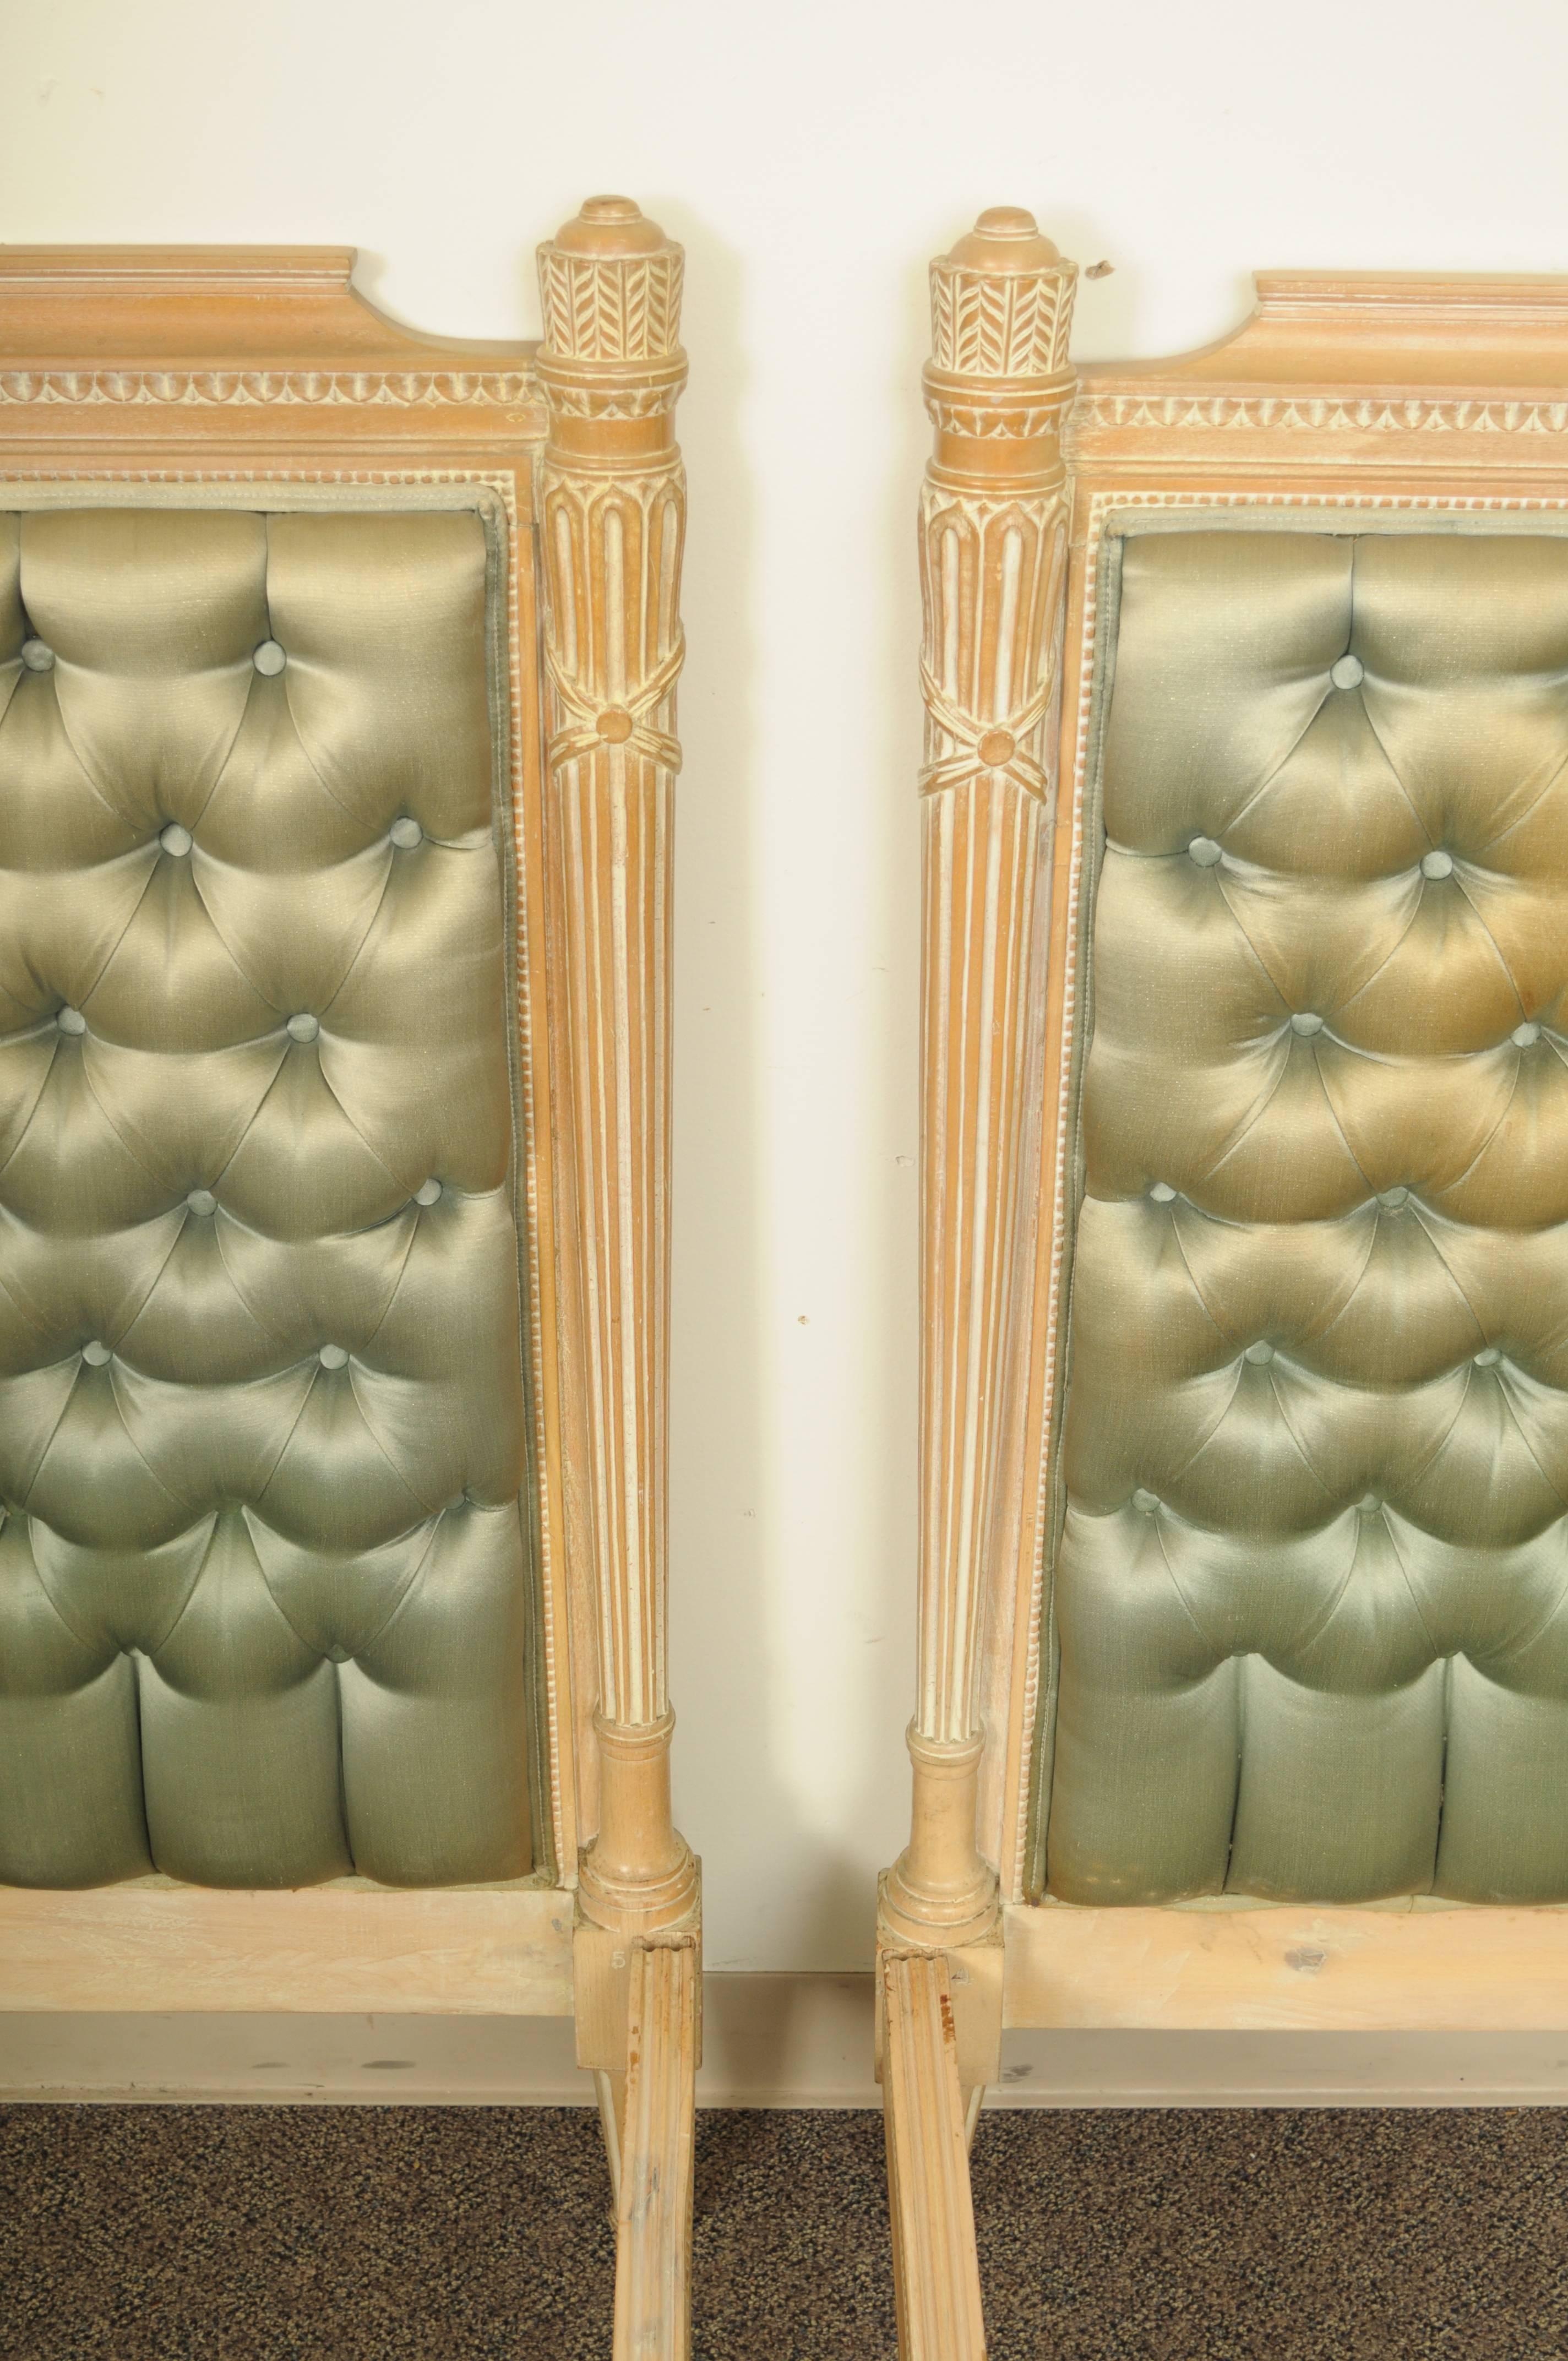 High quality pair of vintage carved and upholstered neoclassical style single / twin beds, made in Italy. Beds feature finely carved solid wood headboards and footboards with white washed distress painted finish. Frames feature unique wheat sheaf